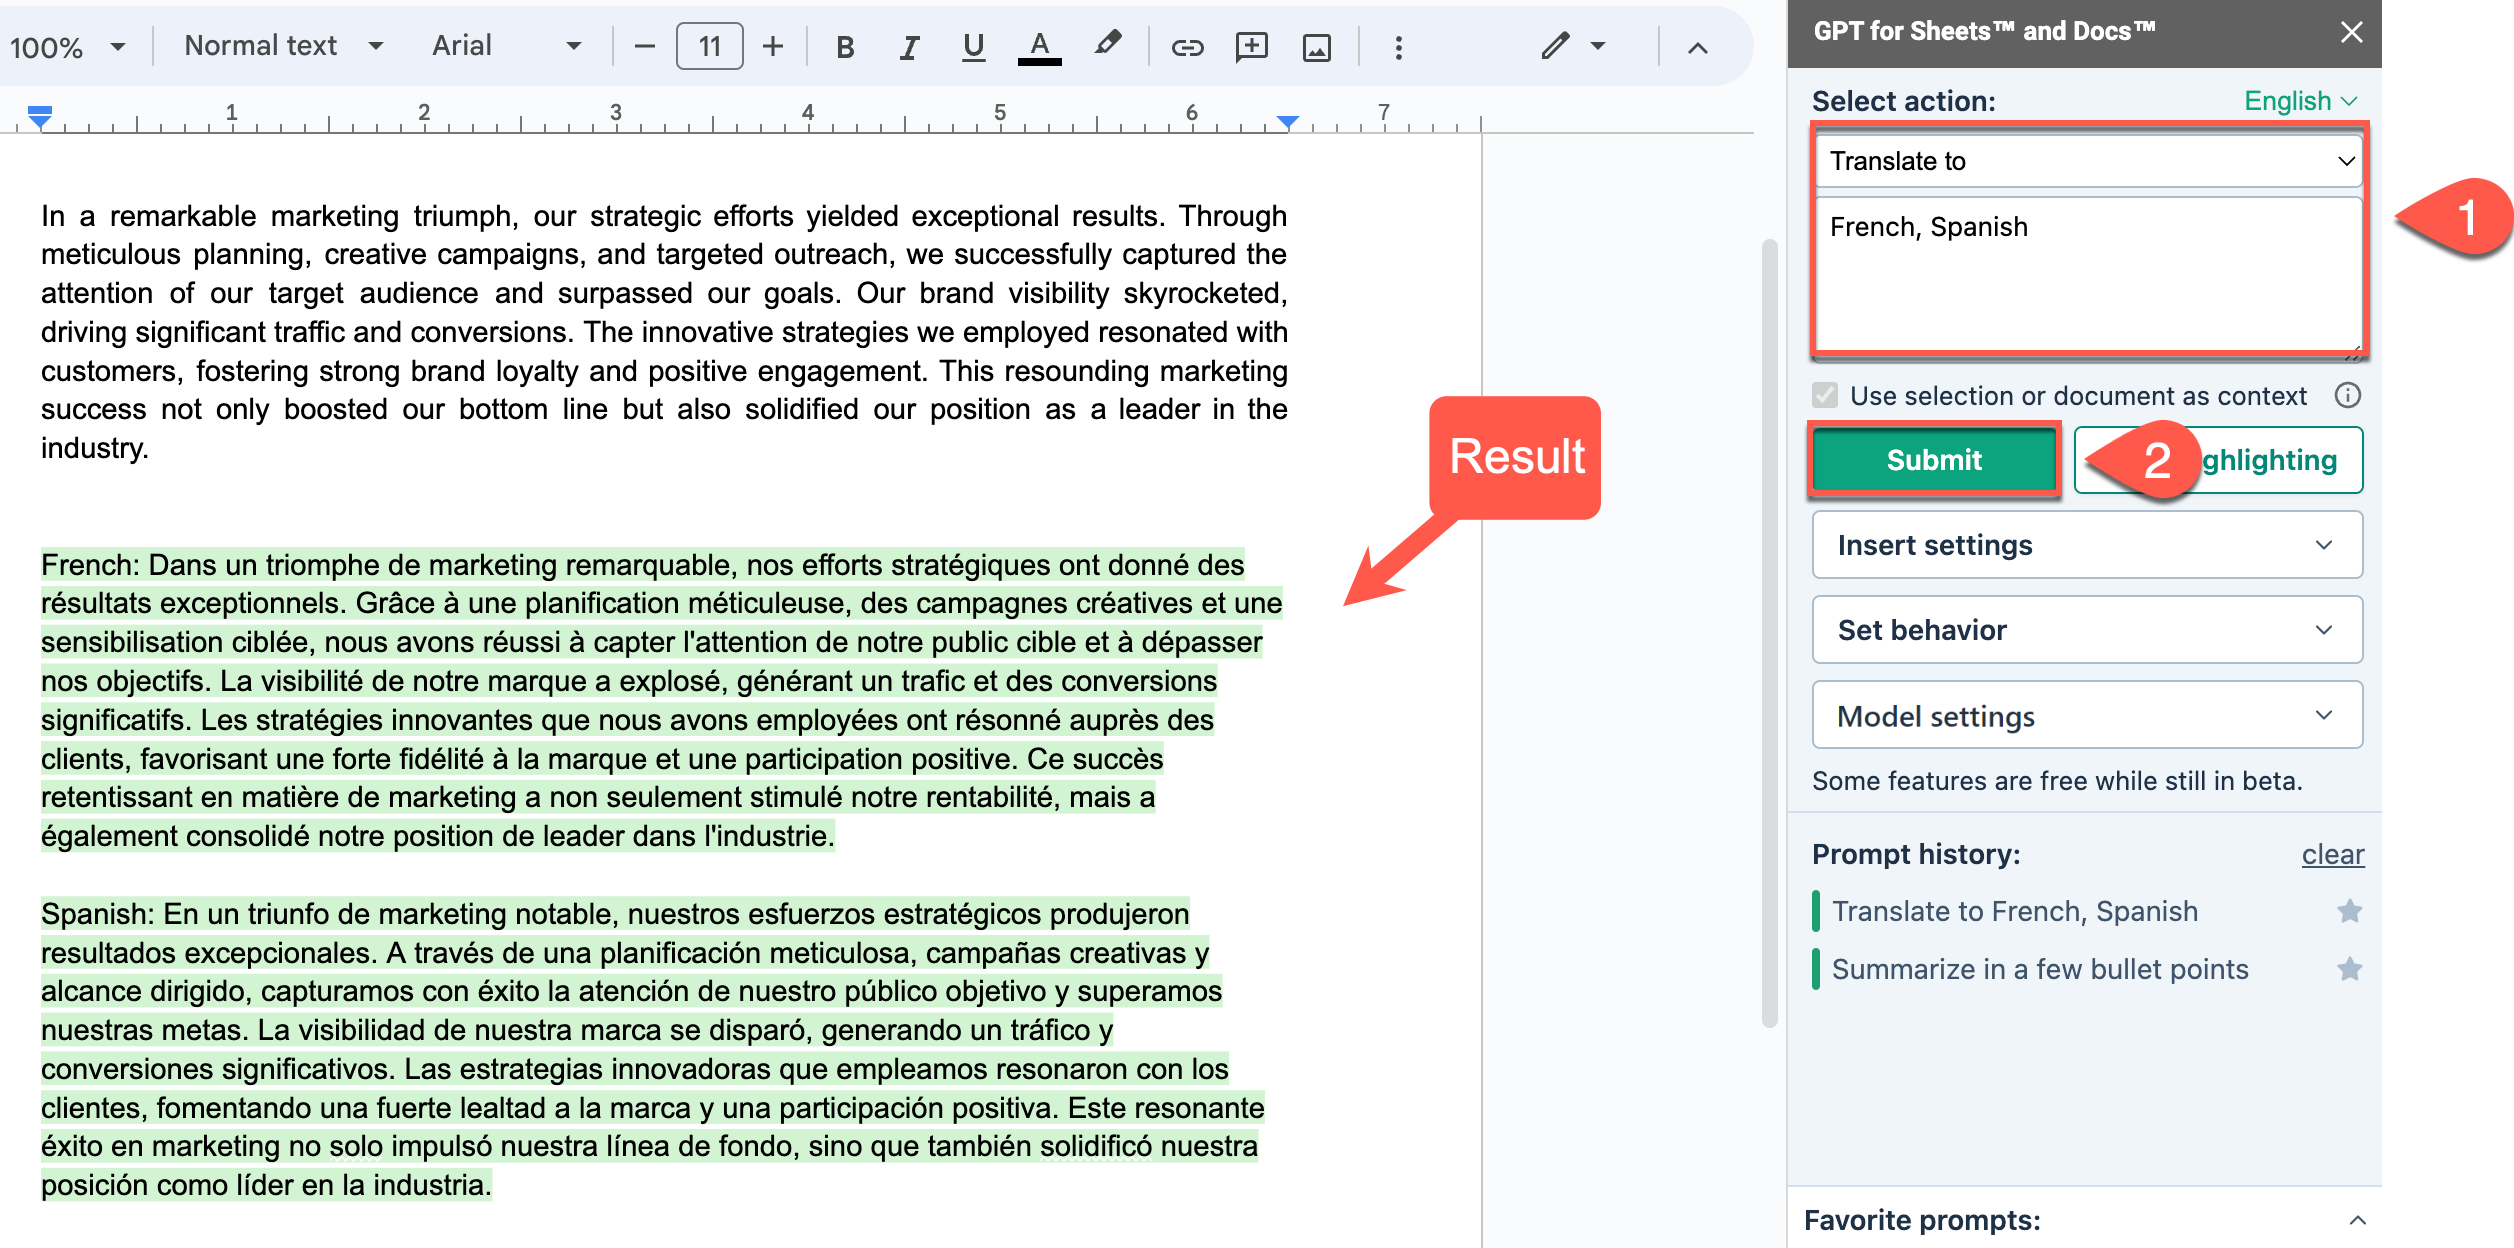 The French and Spanish translations are inserted in the Google document